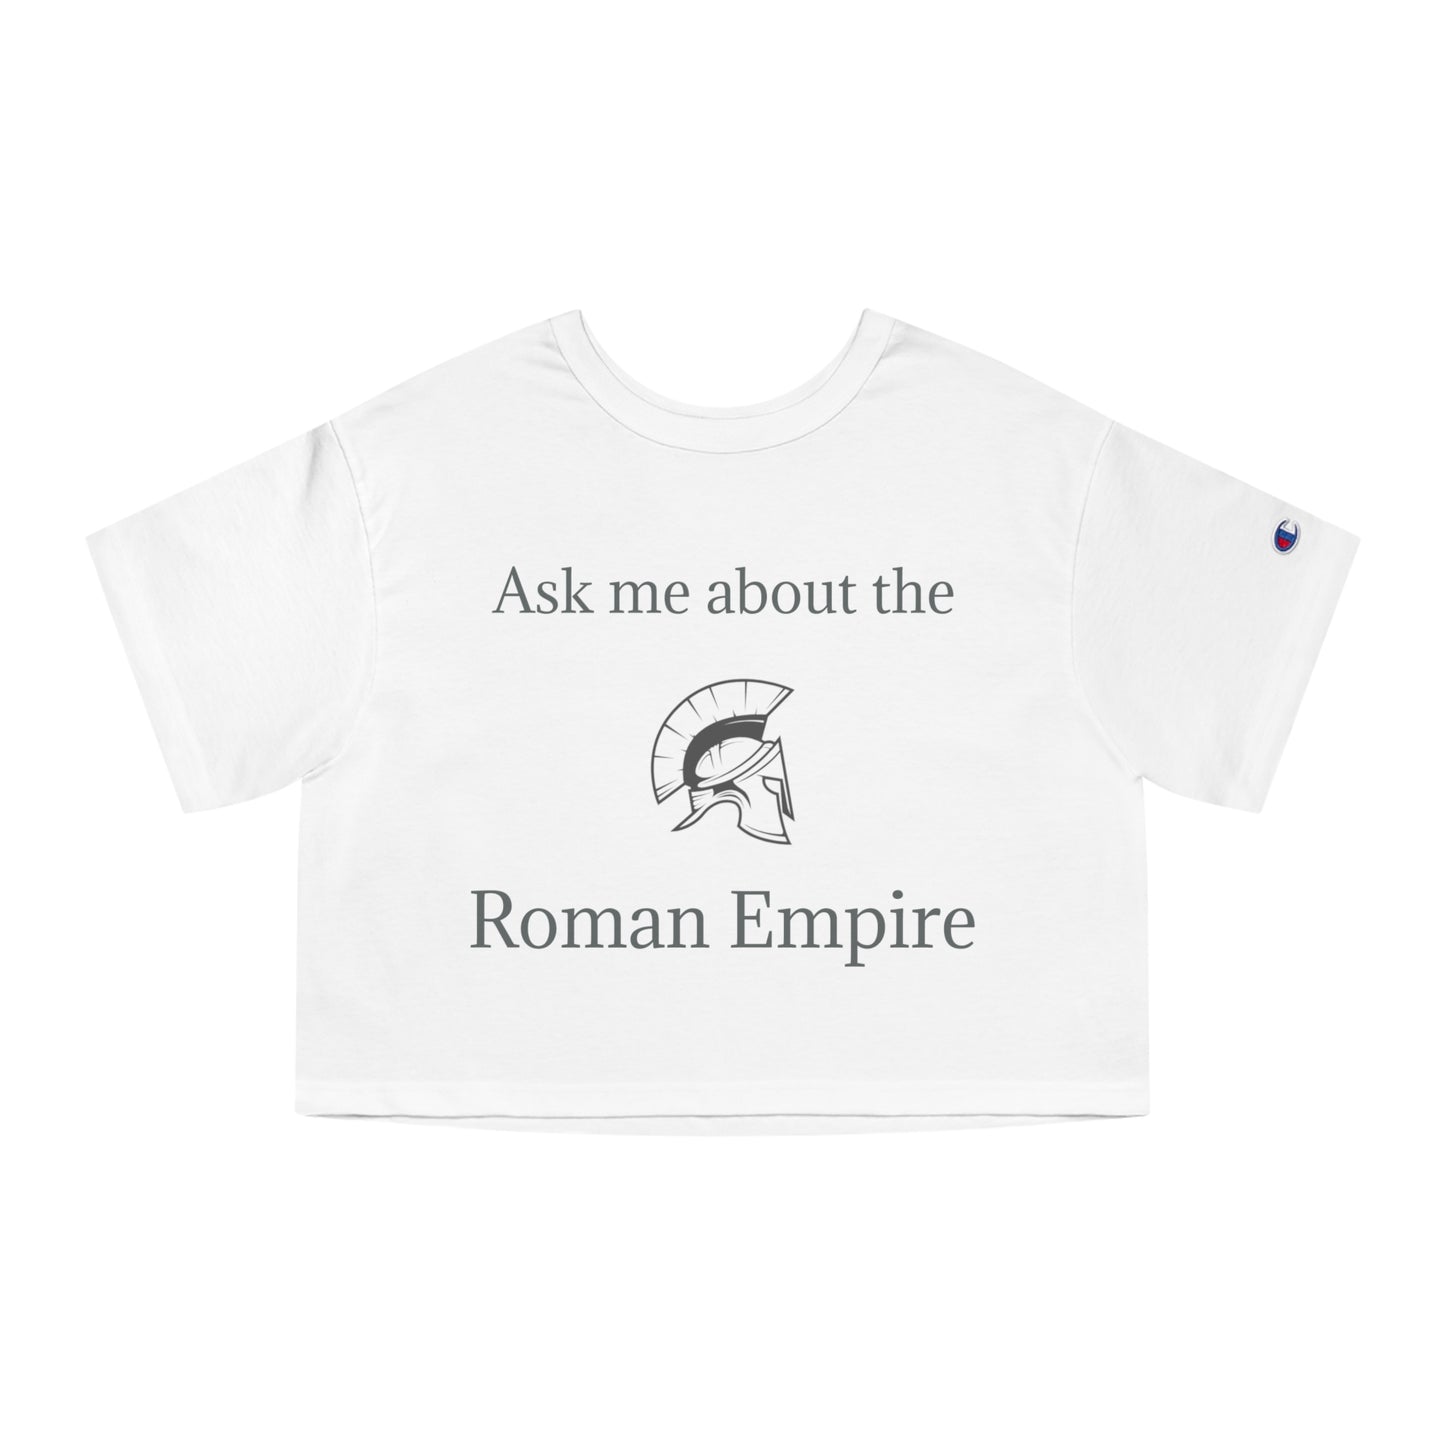 "Ask me about the Roman Empire" - Champion™ crop top